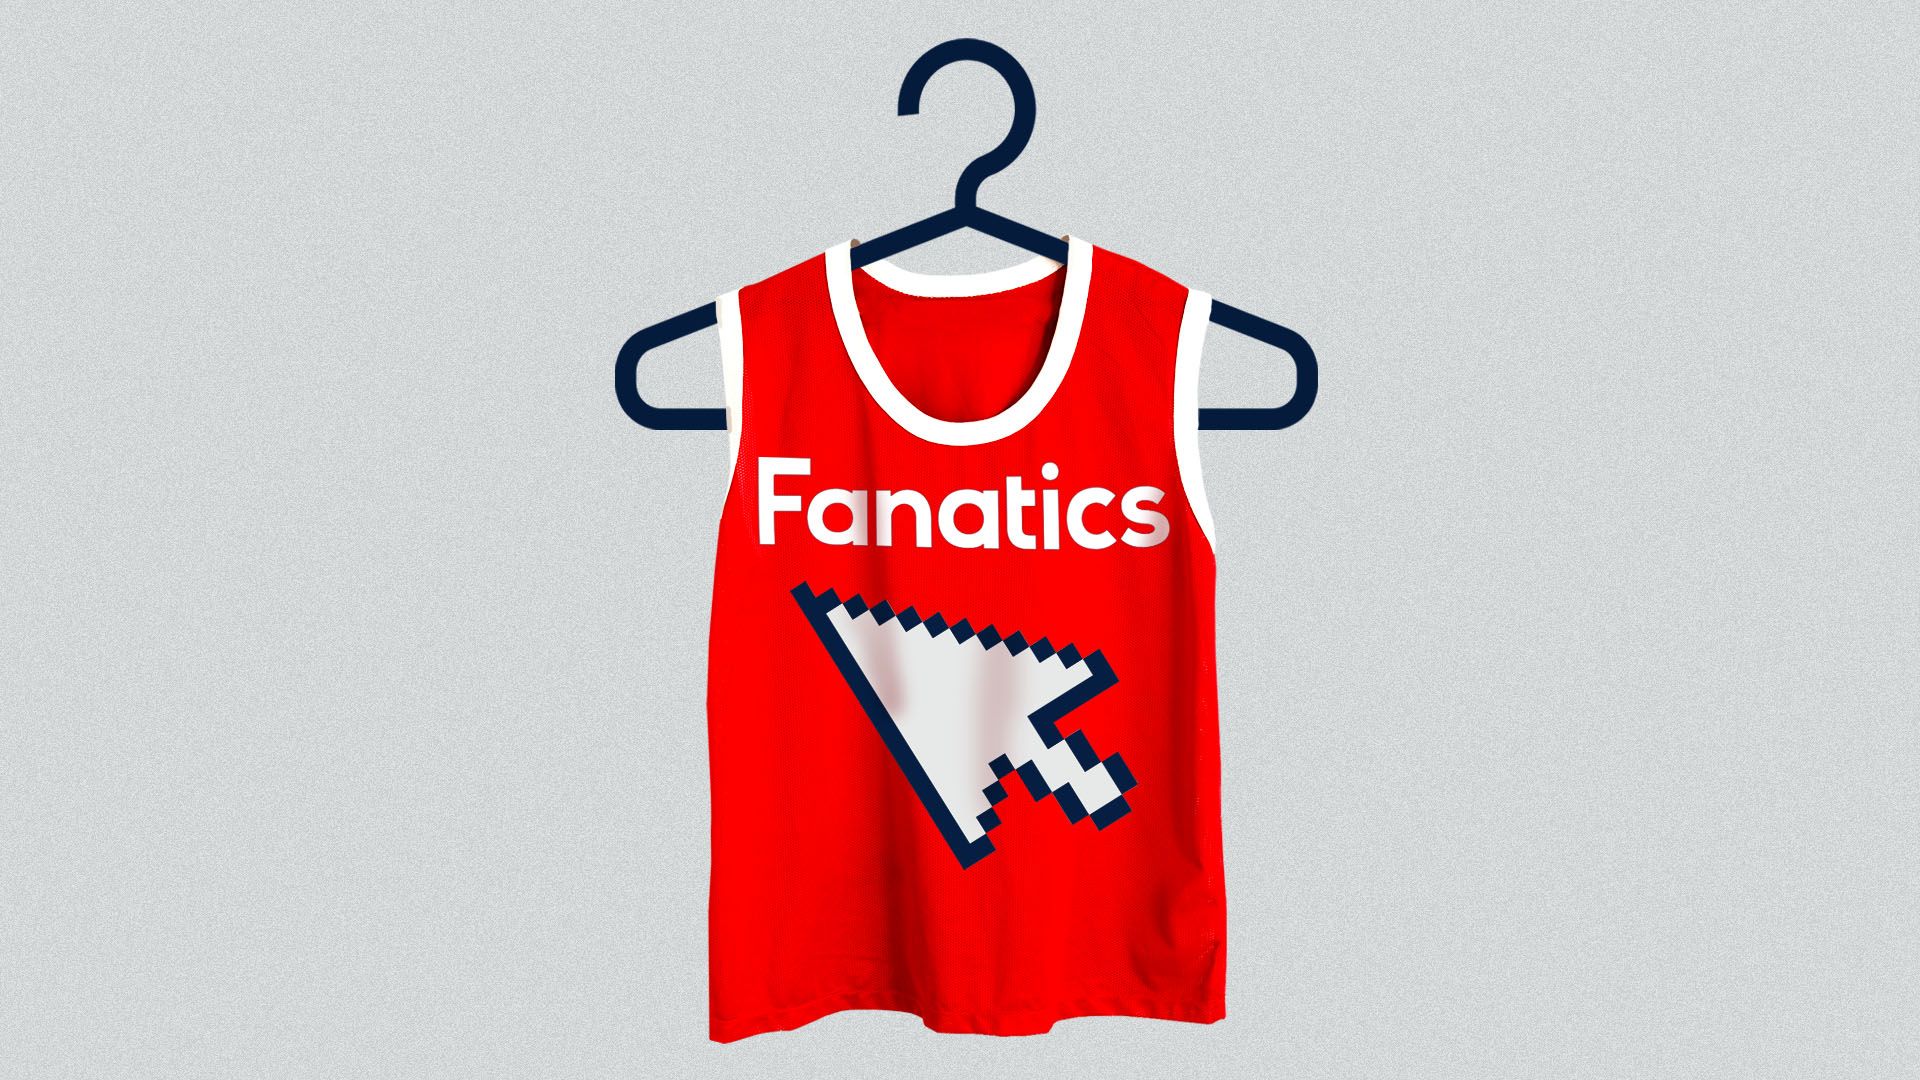 Illustration of a sports apparel shirt with the Fanatics logo and a cursor on it